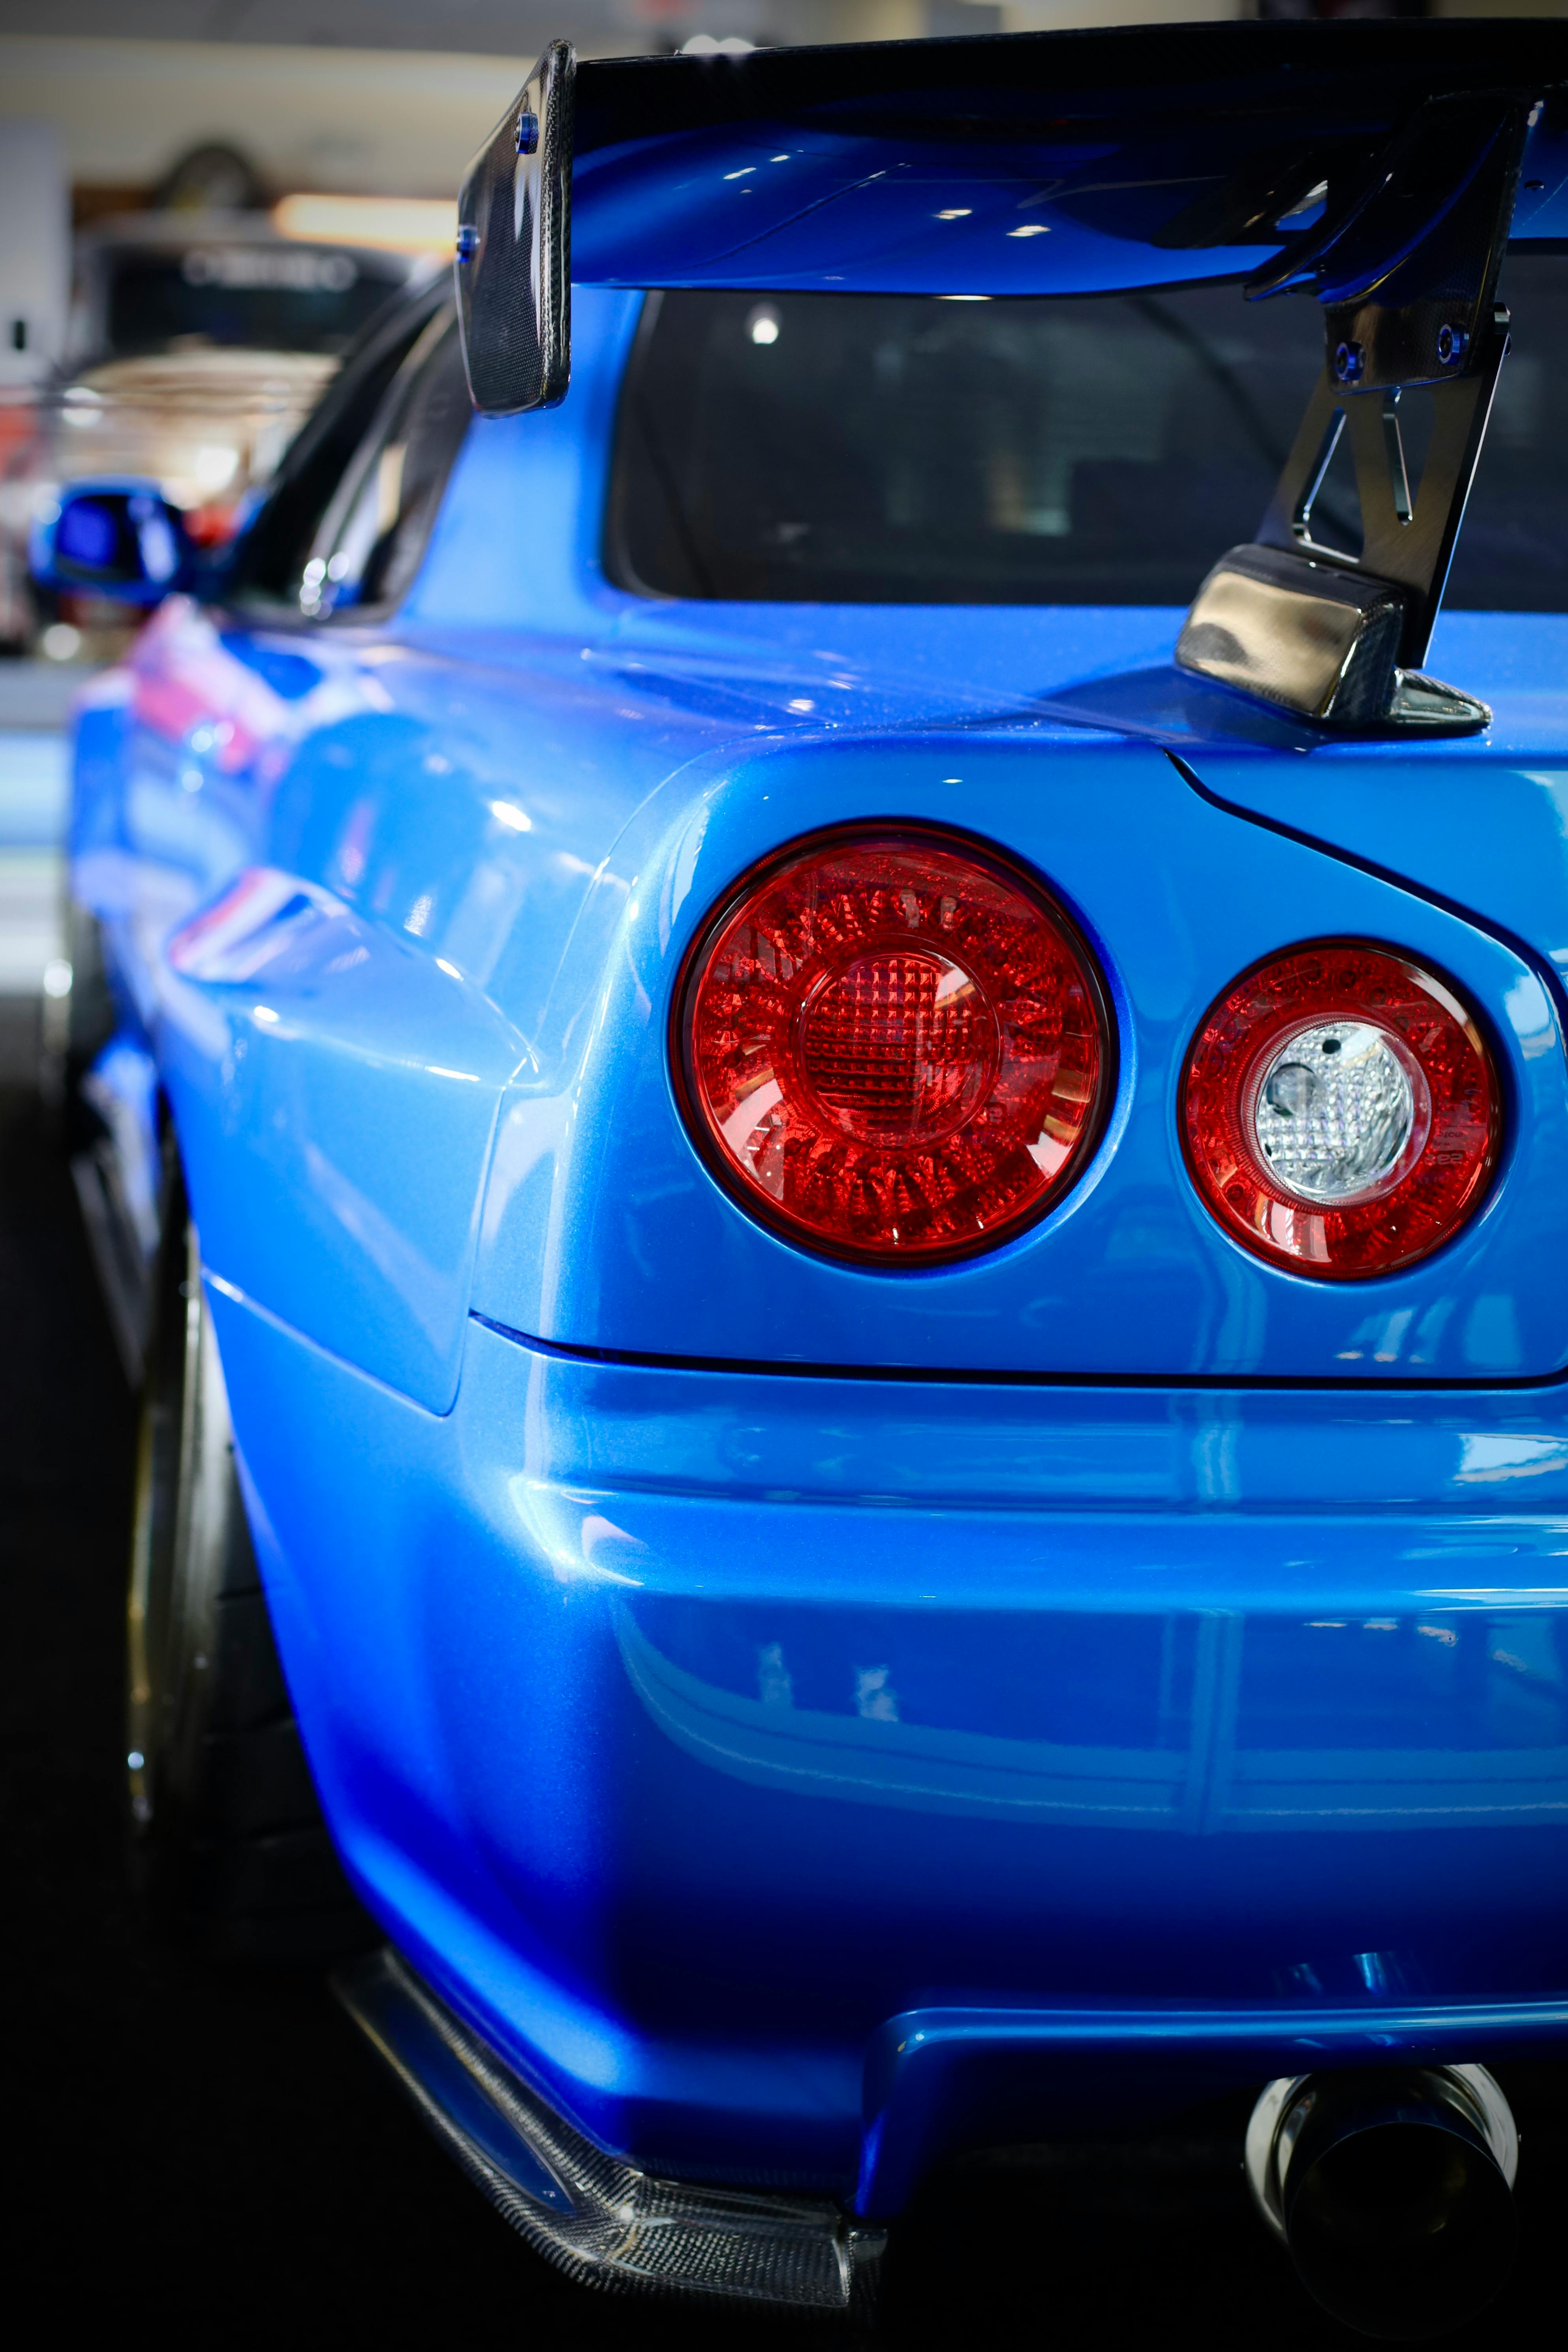 Wallpaper ID 502202  1080P Nissan Skyline GTR R34 Need for Speed car  free download